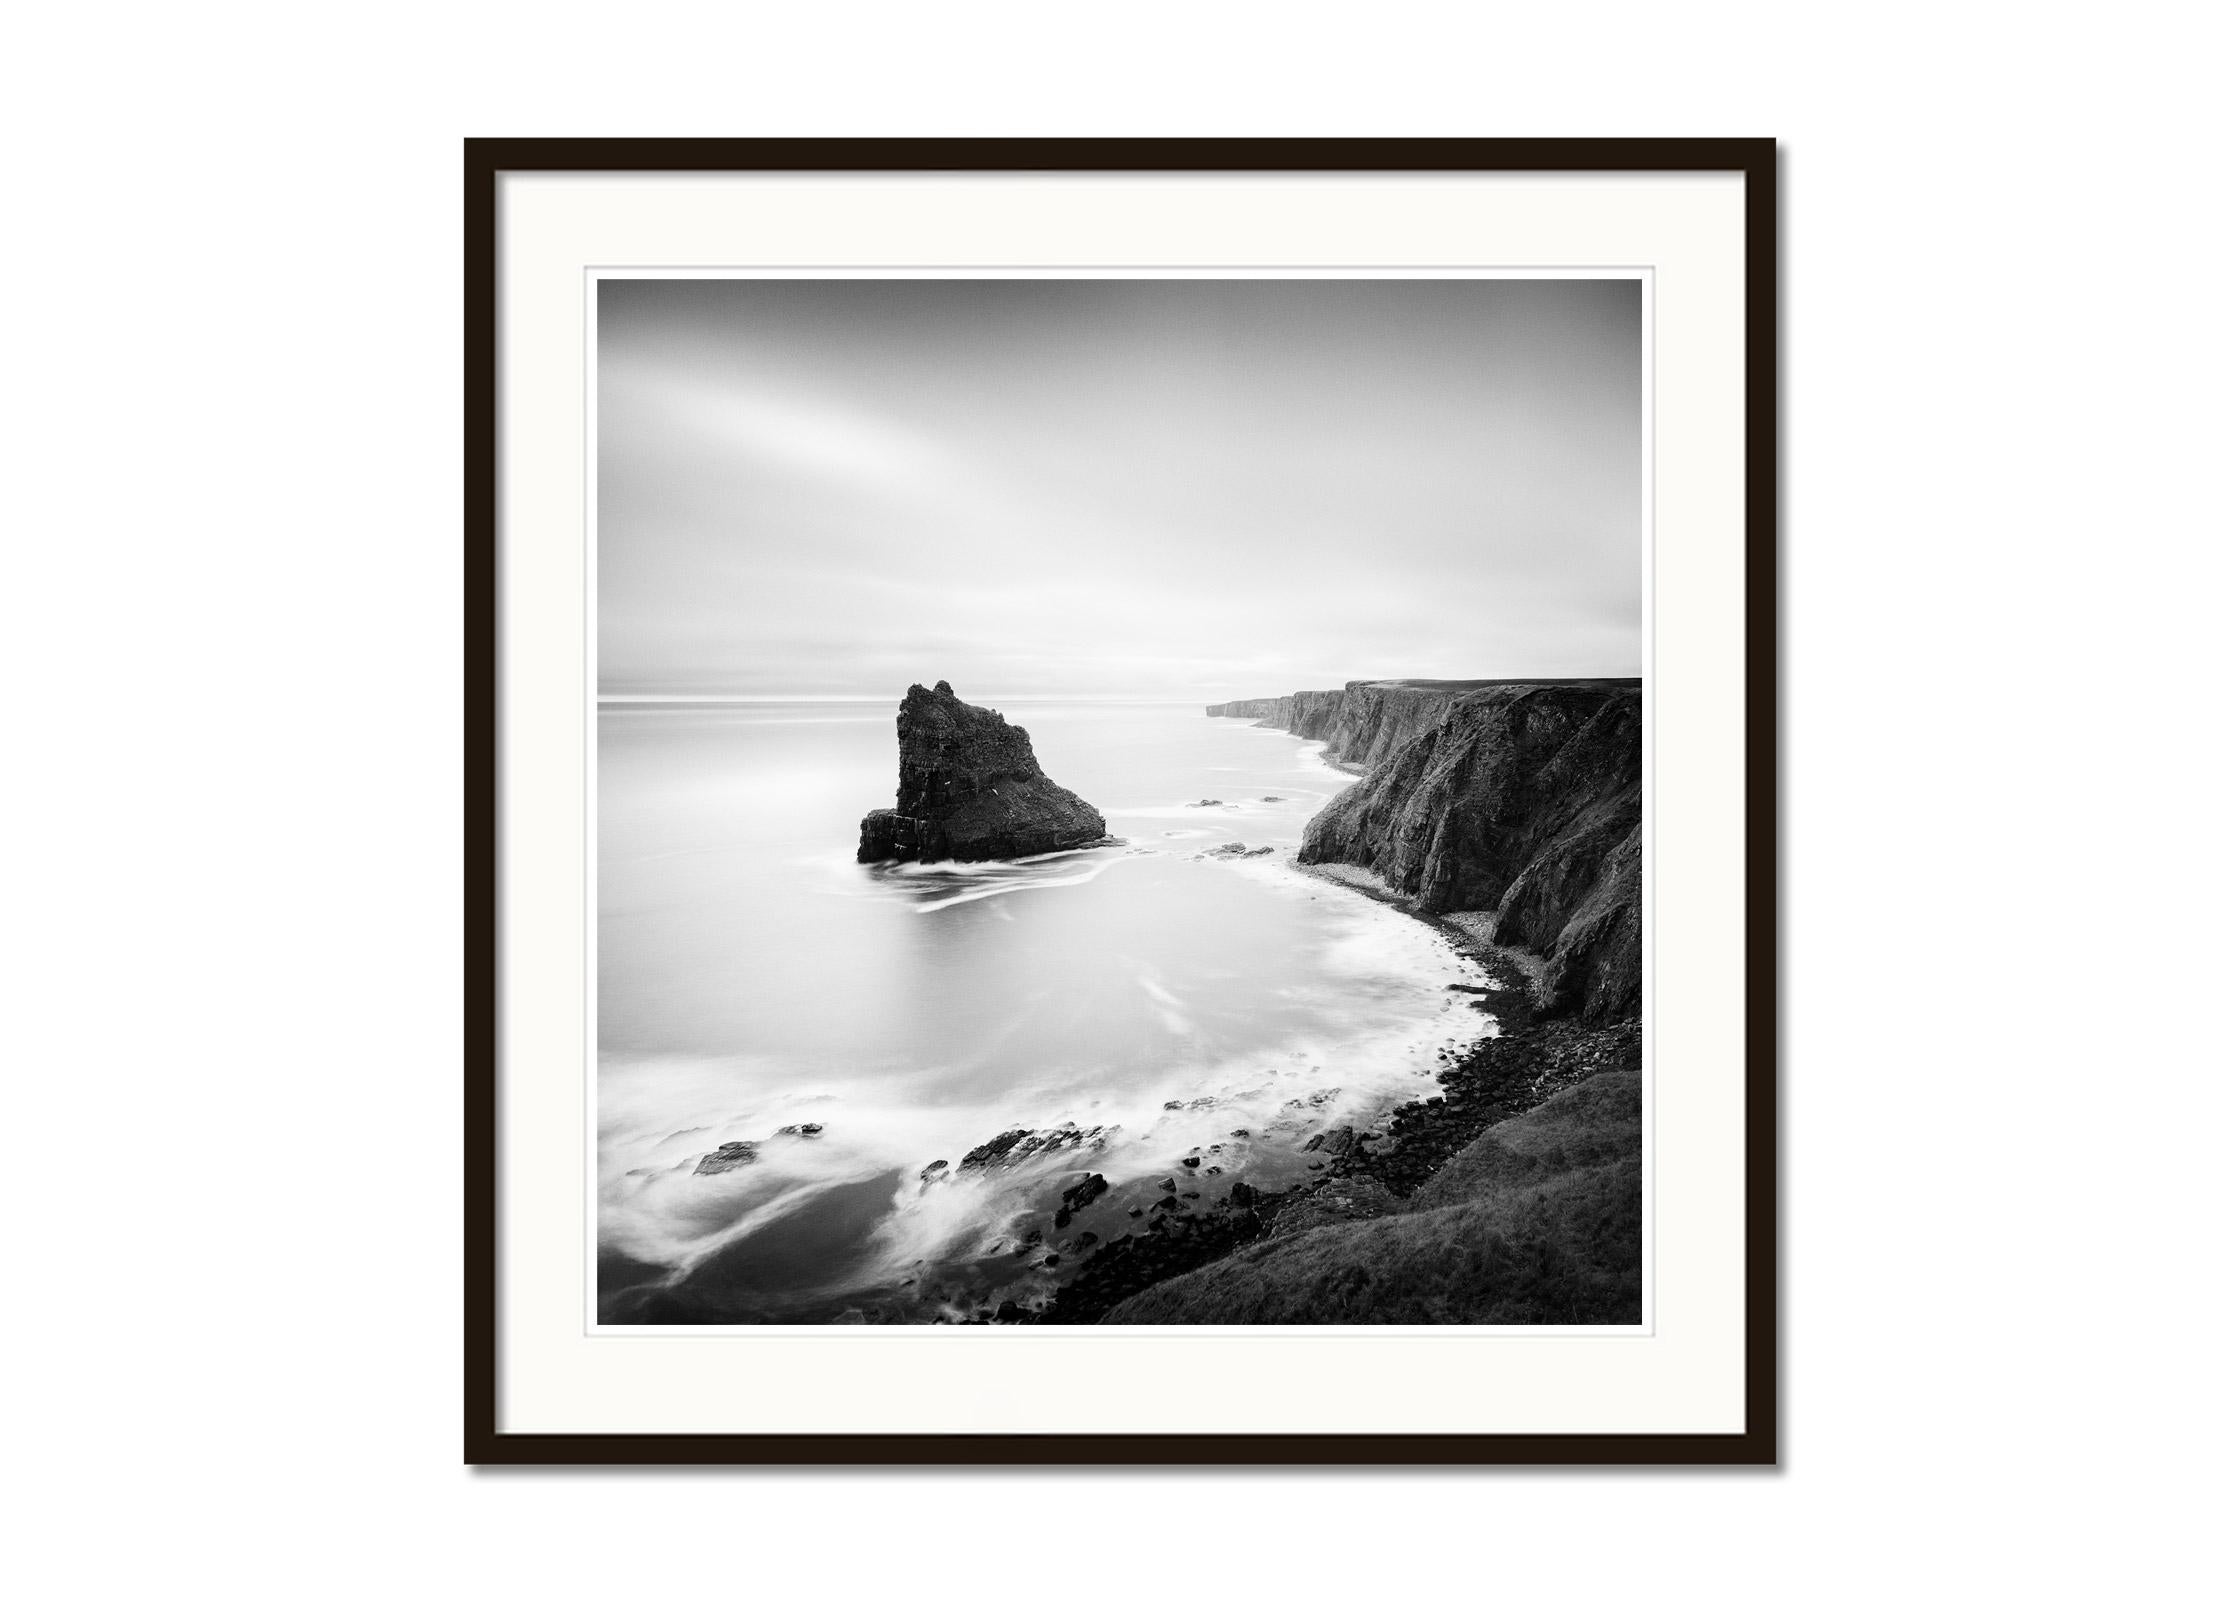 Surreal Moment, scottish coastline, black and white art photography, landscape - Contemporary Photograph by Gerald Berghammer, Ina Forstinger